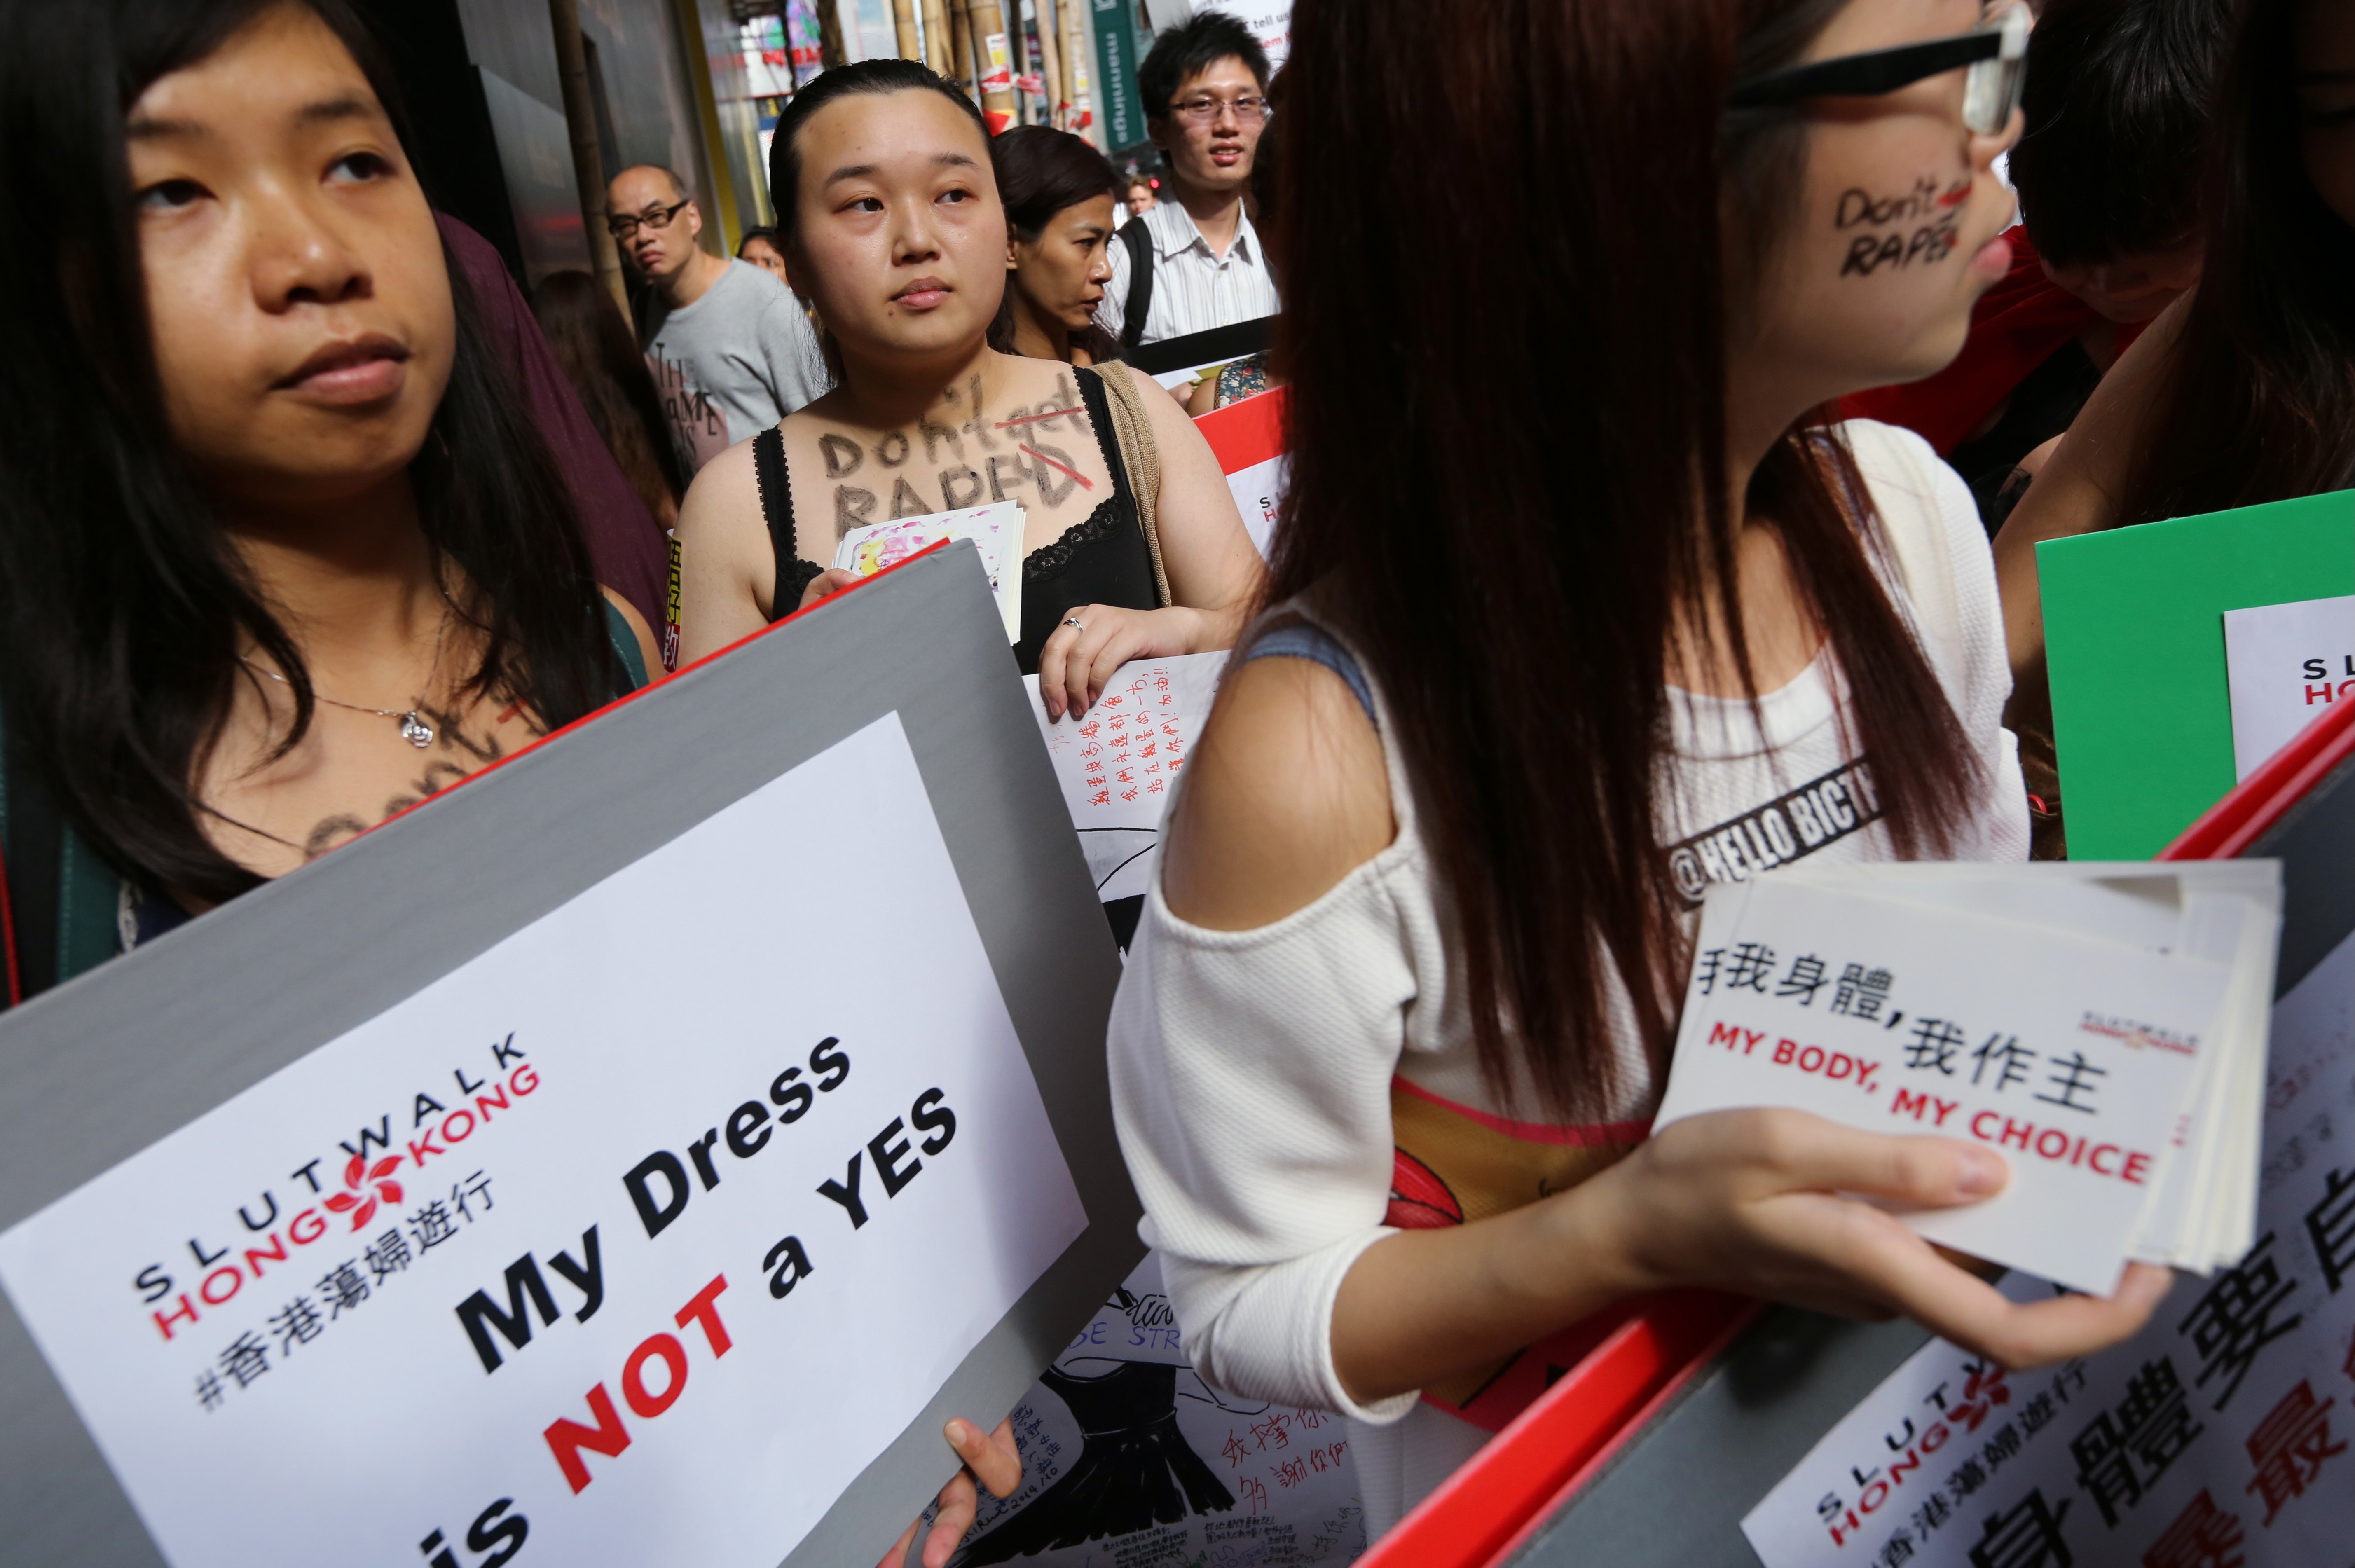 Participants of SlutWalk 2014 march from Causeway Bay to Chater Garden in Central, to demonstrate against those who explain or excuse sex crimes and abuse by referring to a woman’s appearance, in October that year. Photo: Sam Tsang